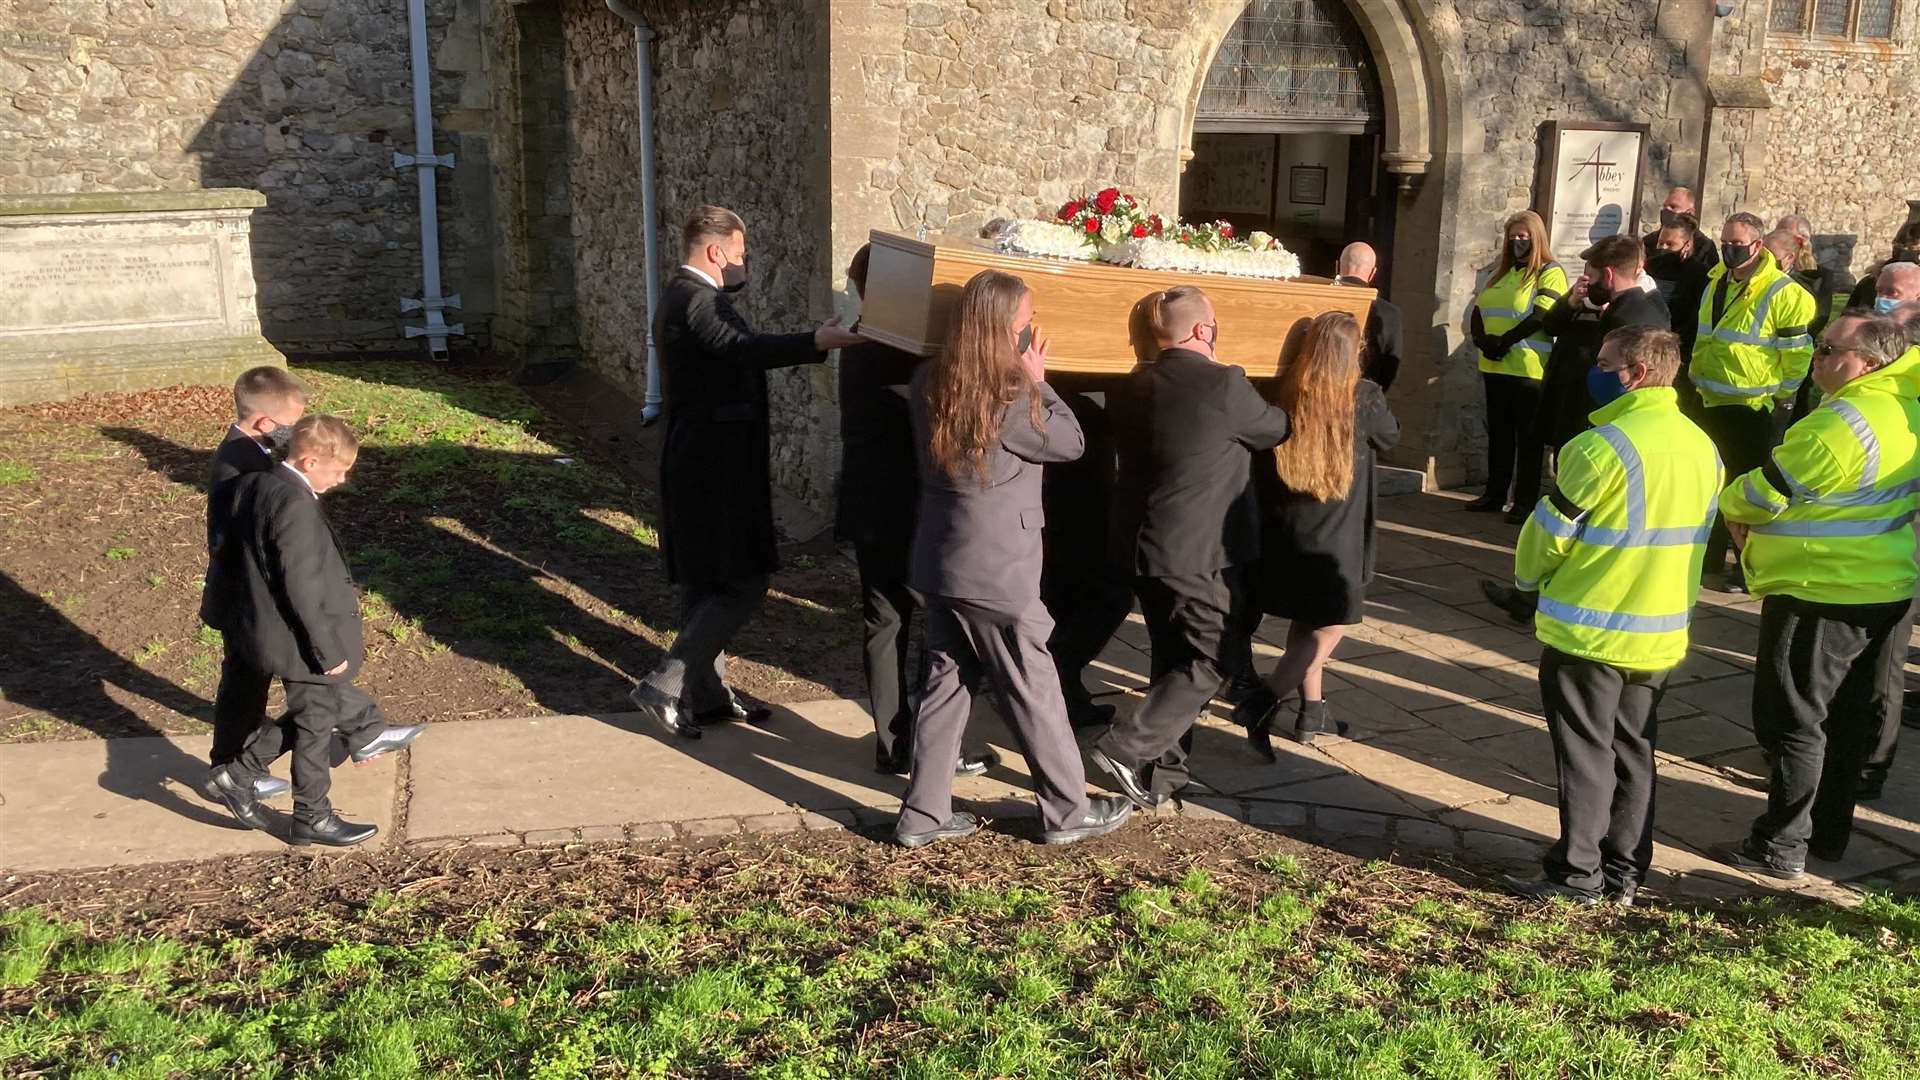 Sheppey EMUs founder David O'Neill's funeral at Minster Abbey